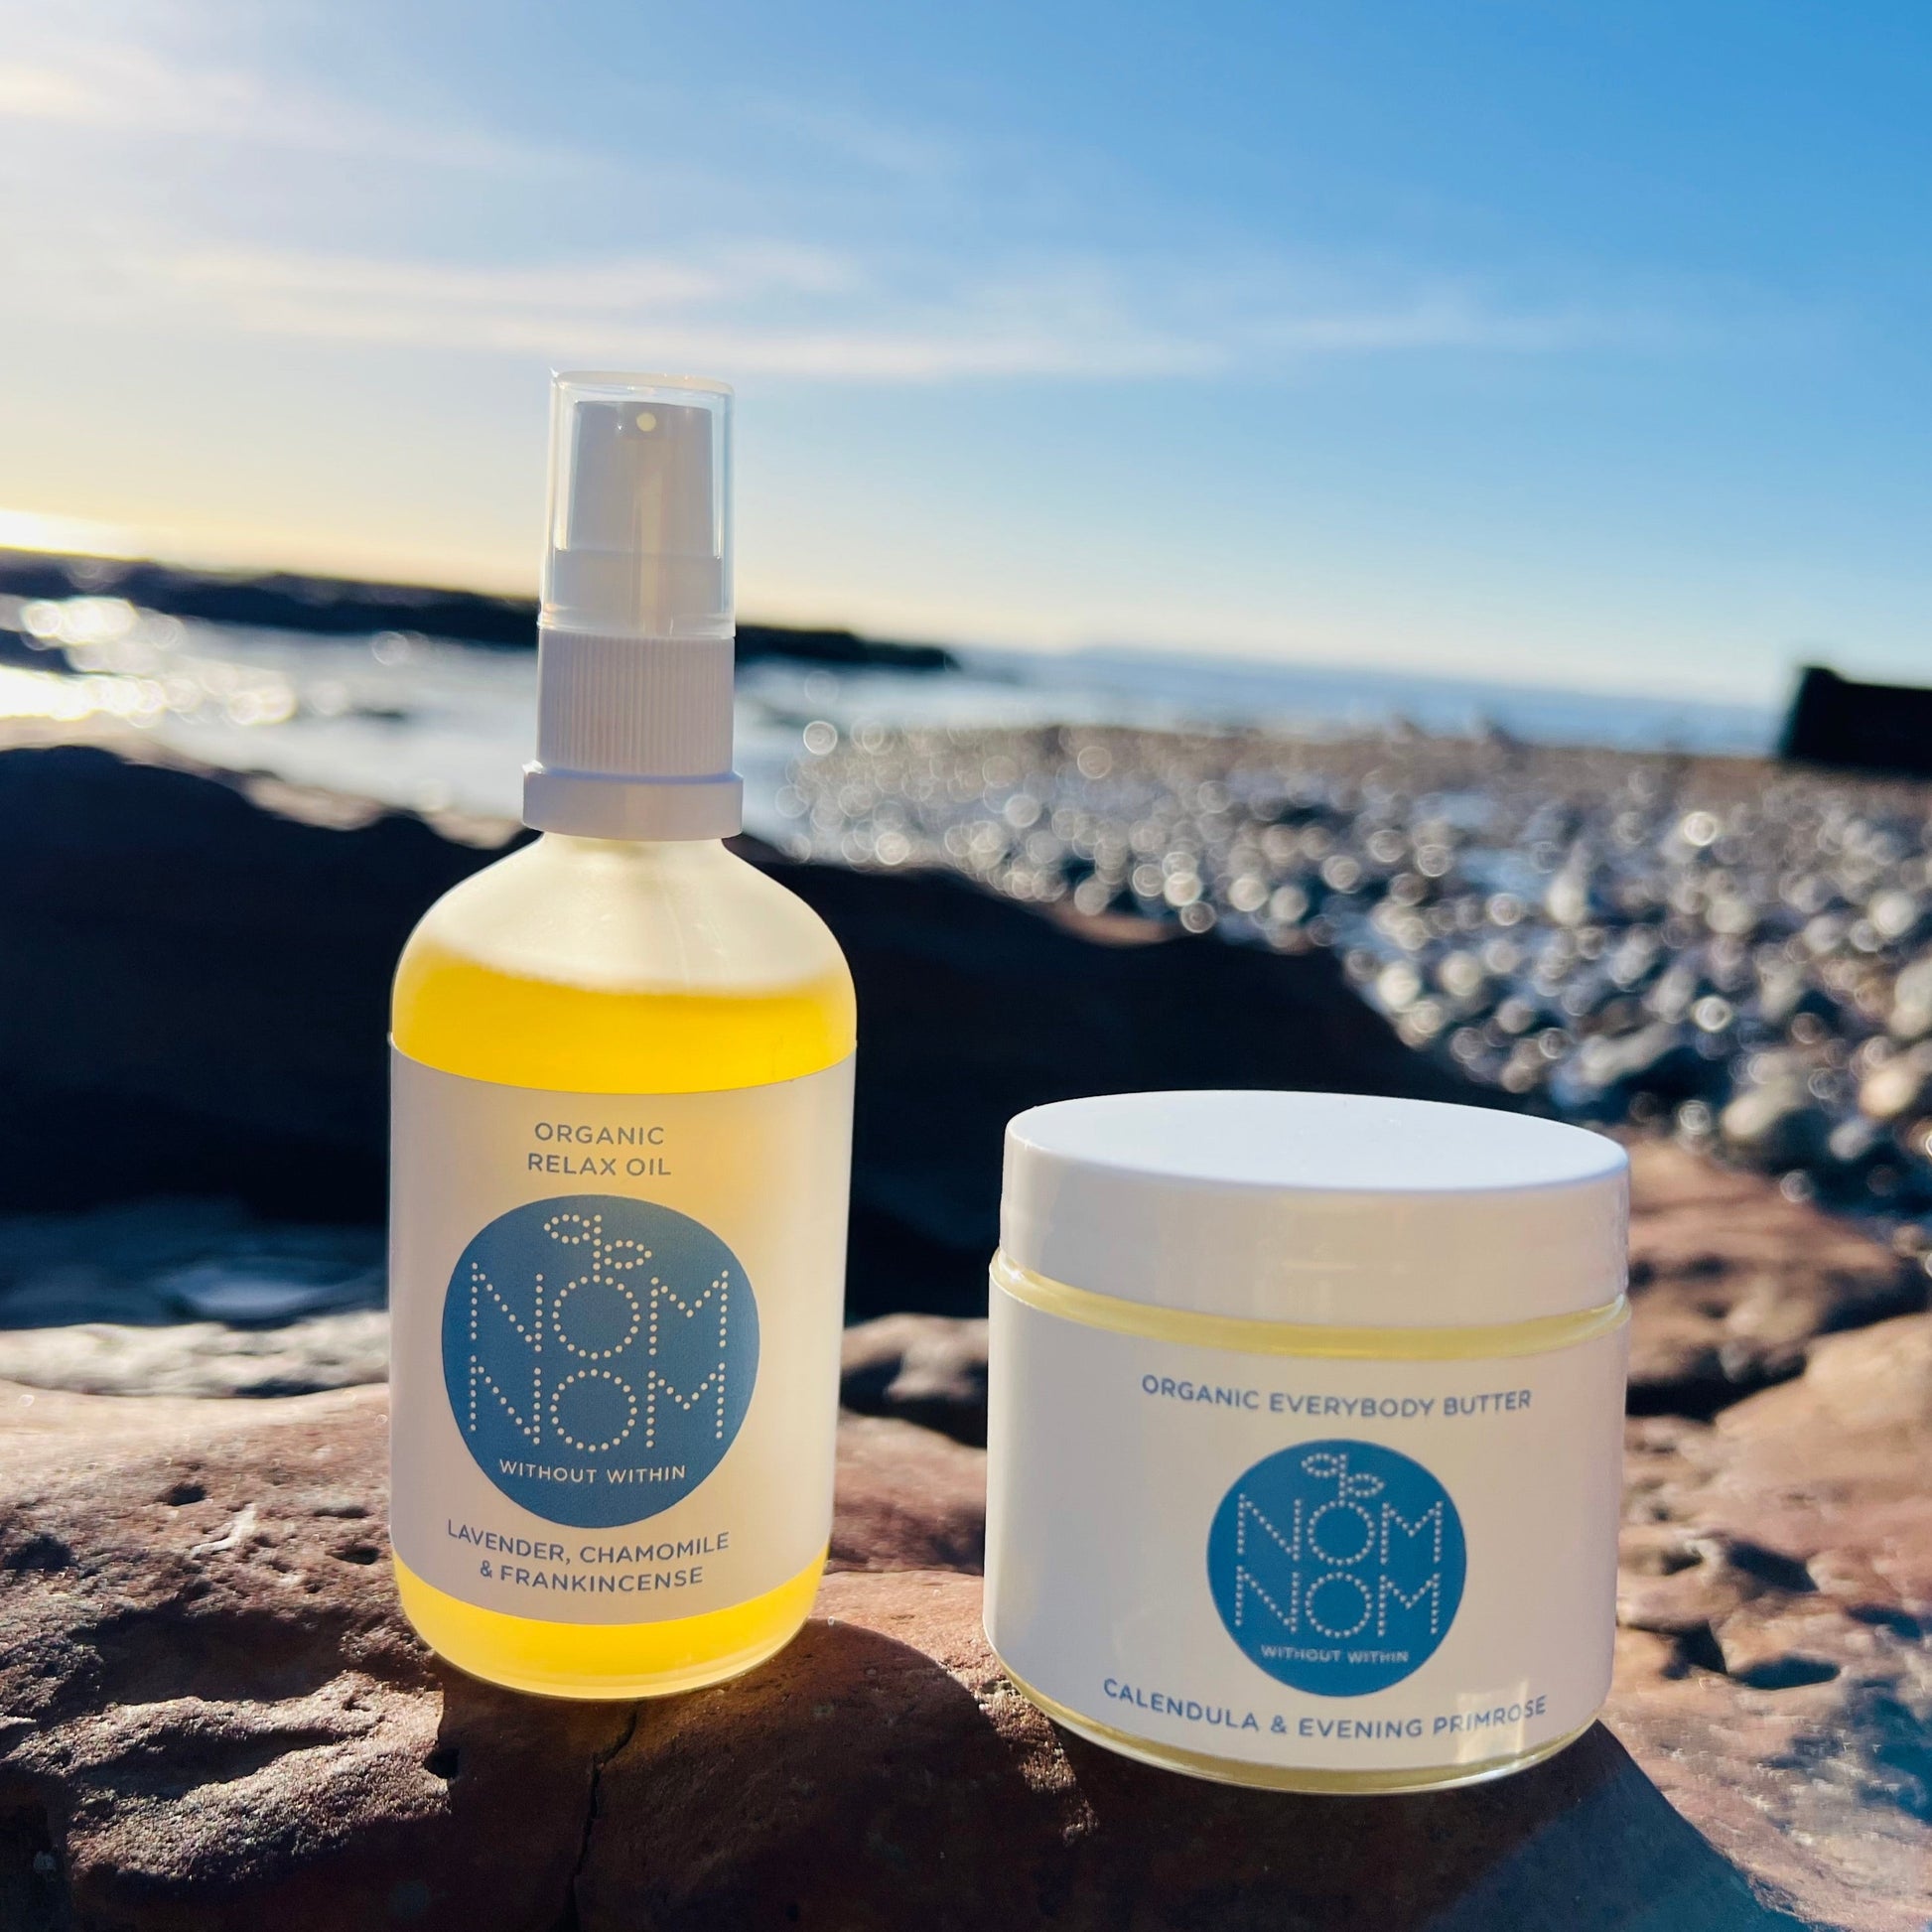 photo of nom nom skincare organic body oil and body butter sitting on the edge of a rock pool. the background is blurred but you can make out a pebble beach and the sea in the background as the products sit in the evening sun